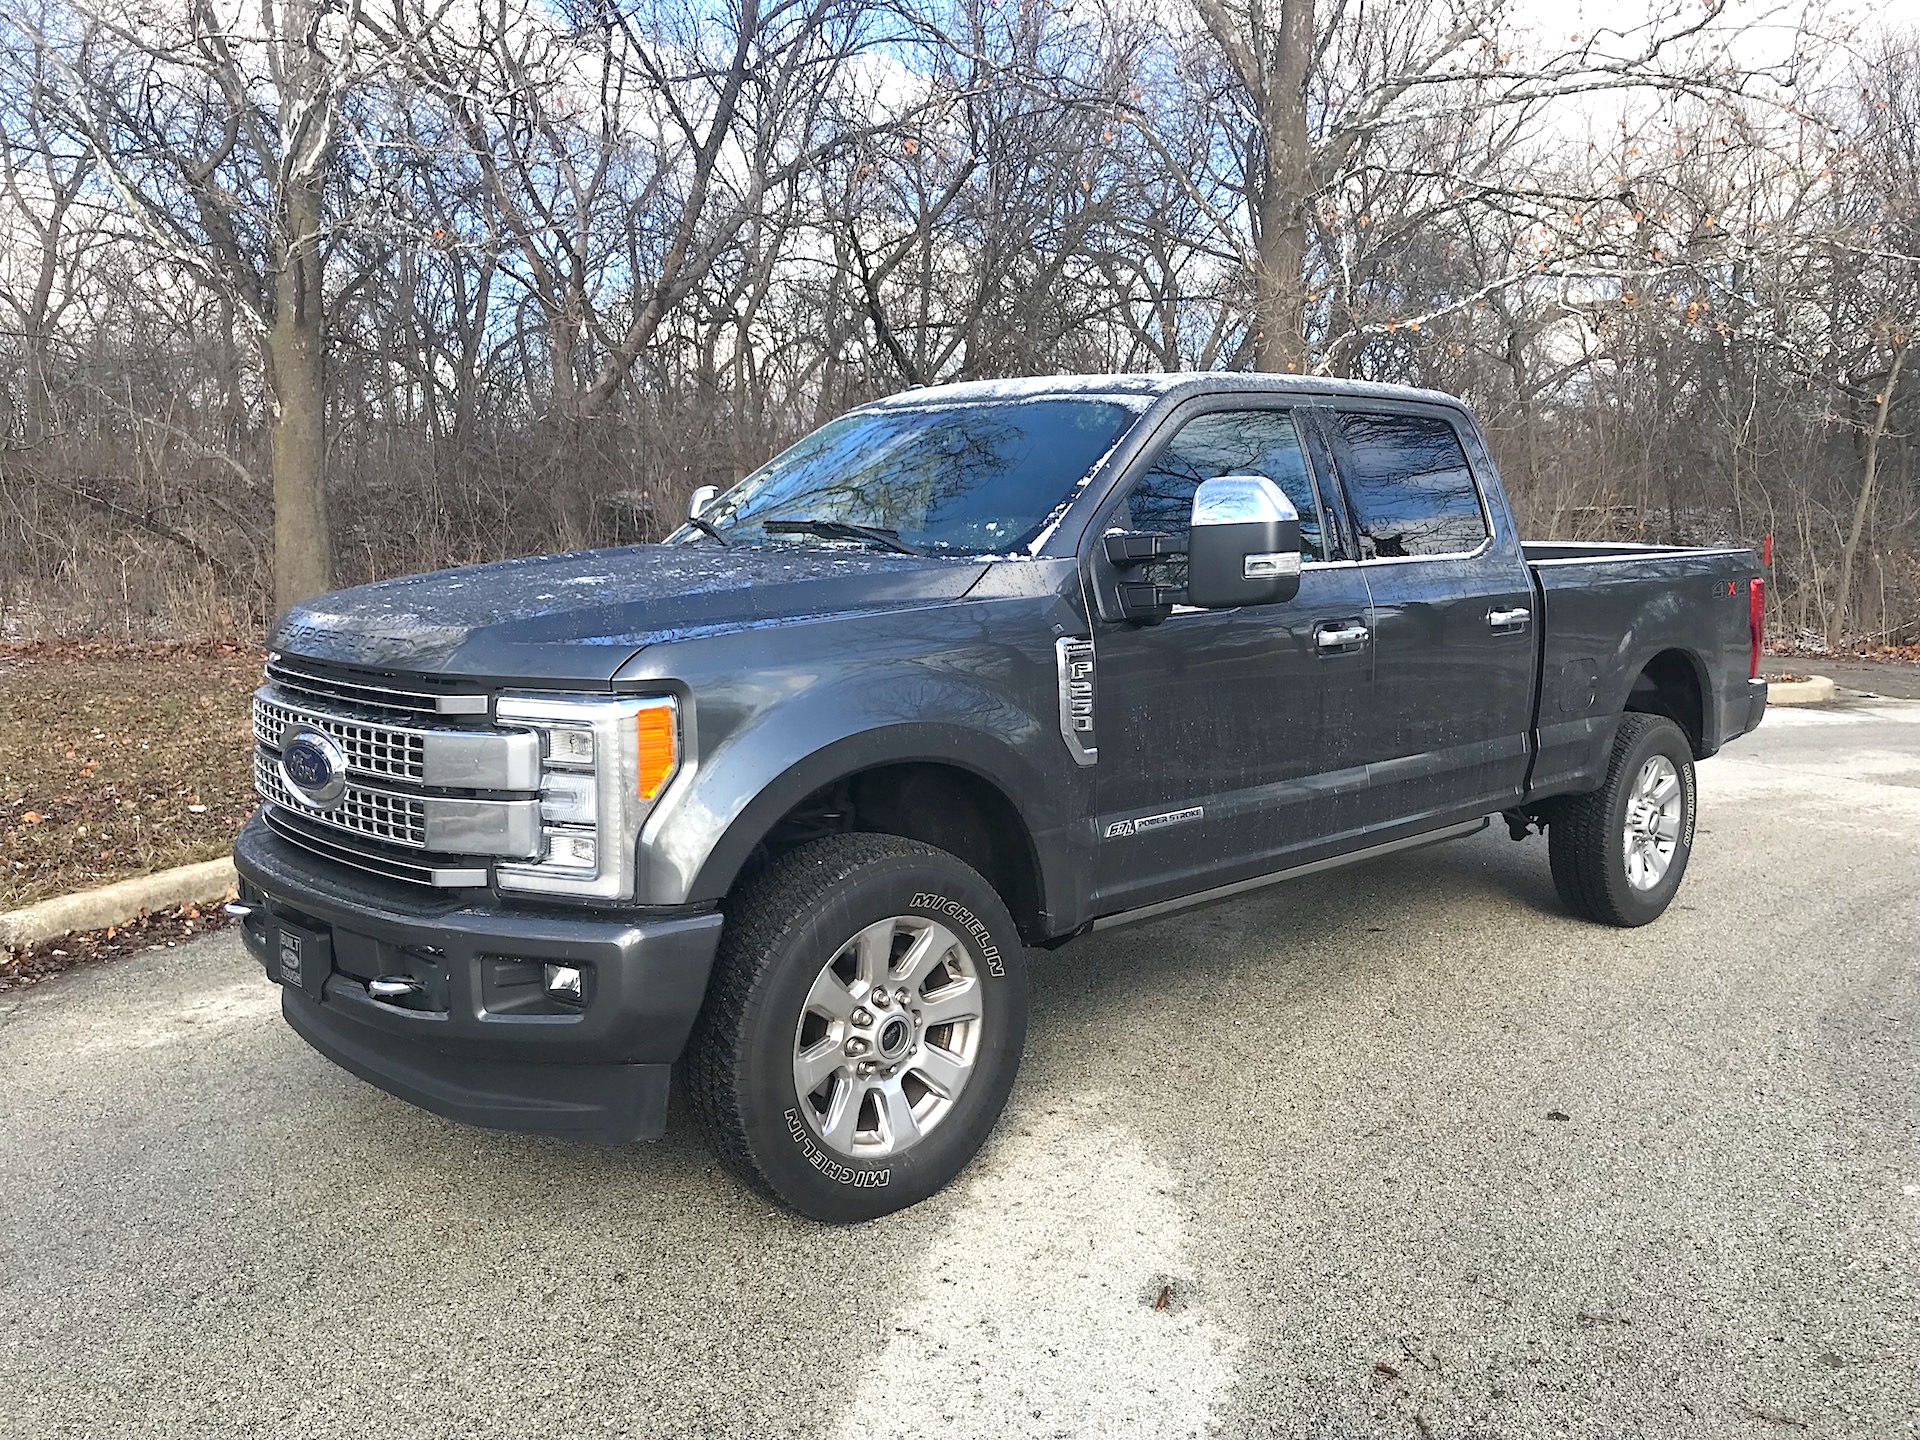 Living and working with the 2017 Ford F-250 Super Duty